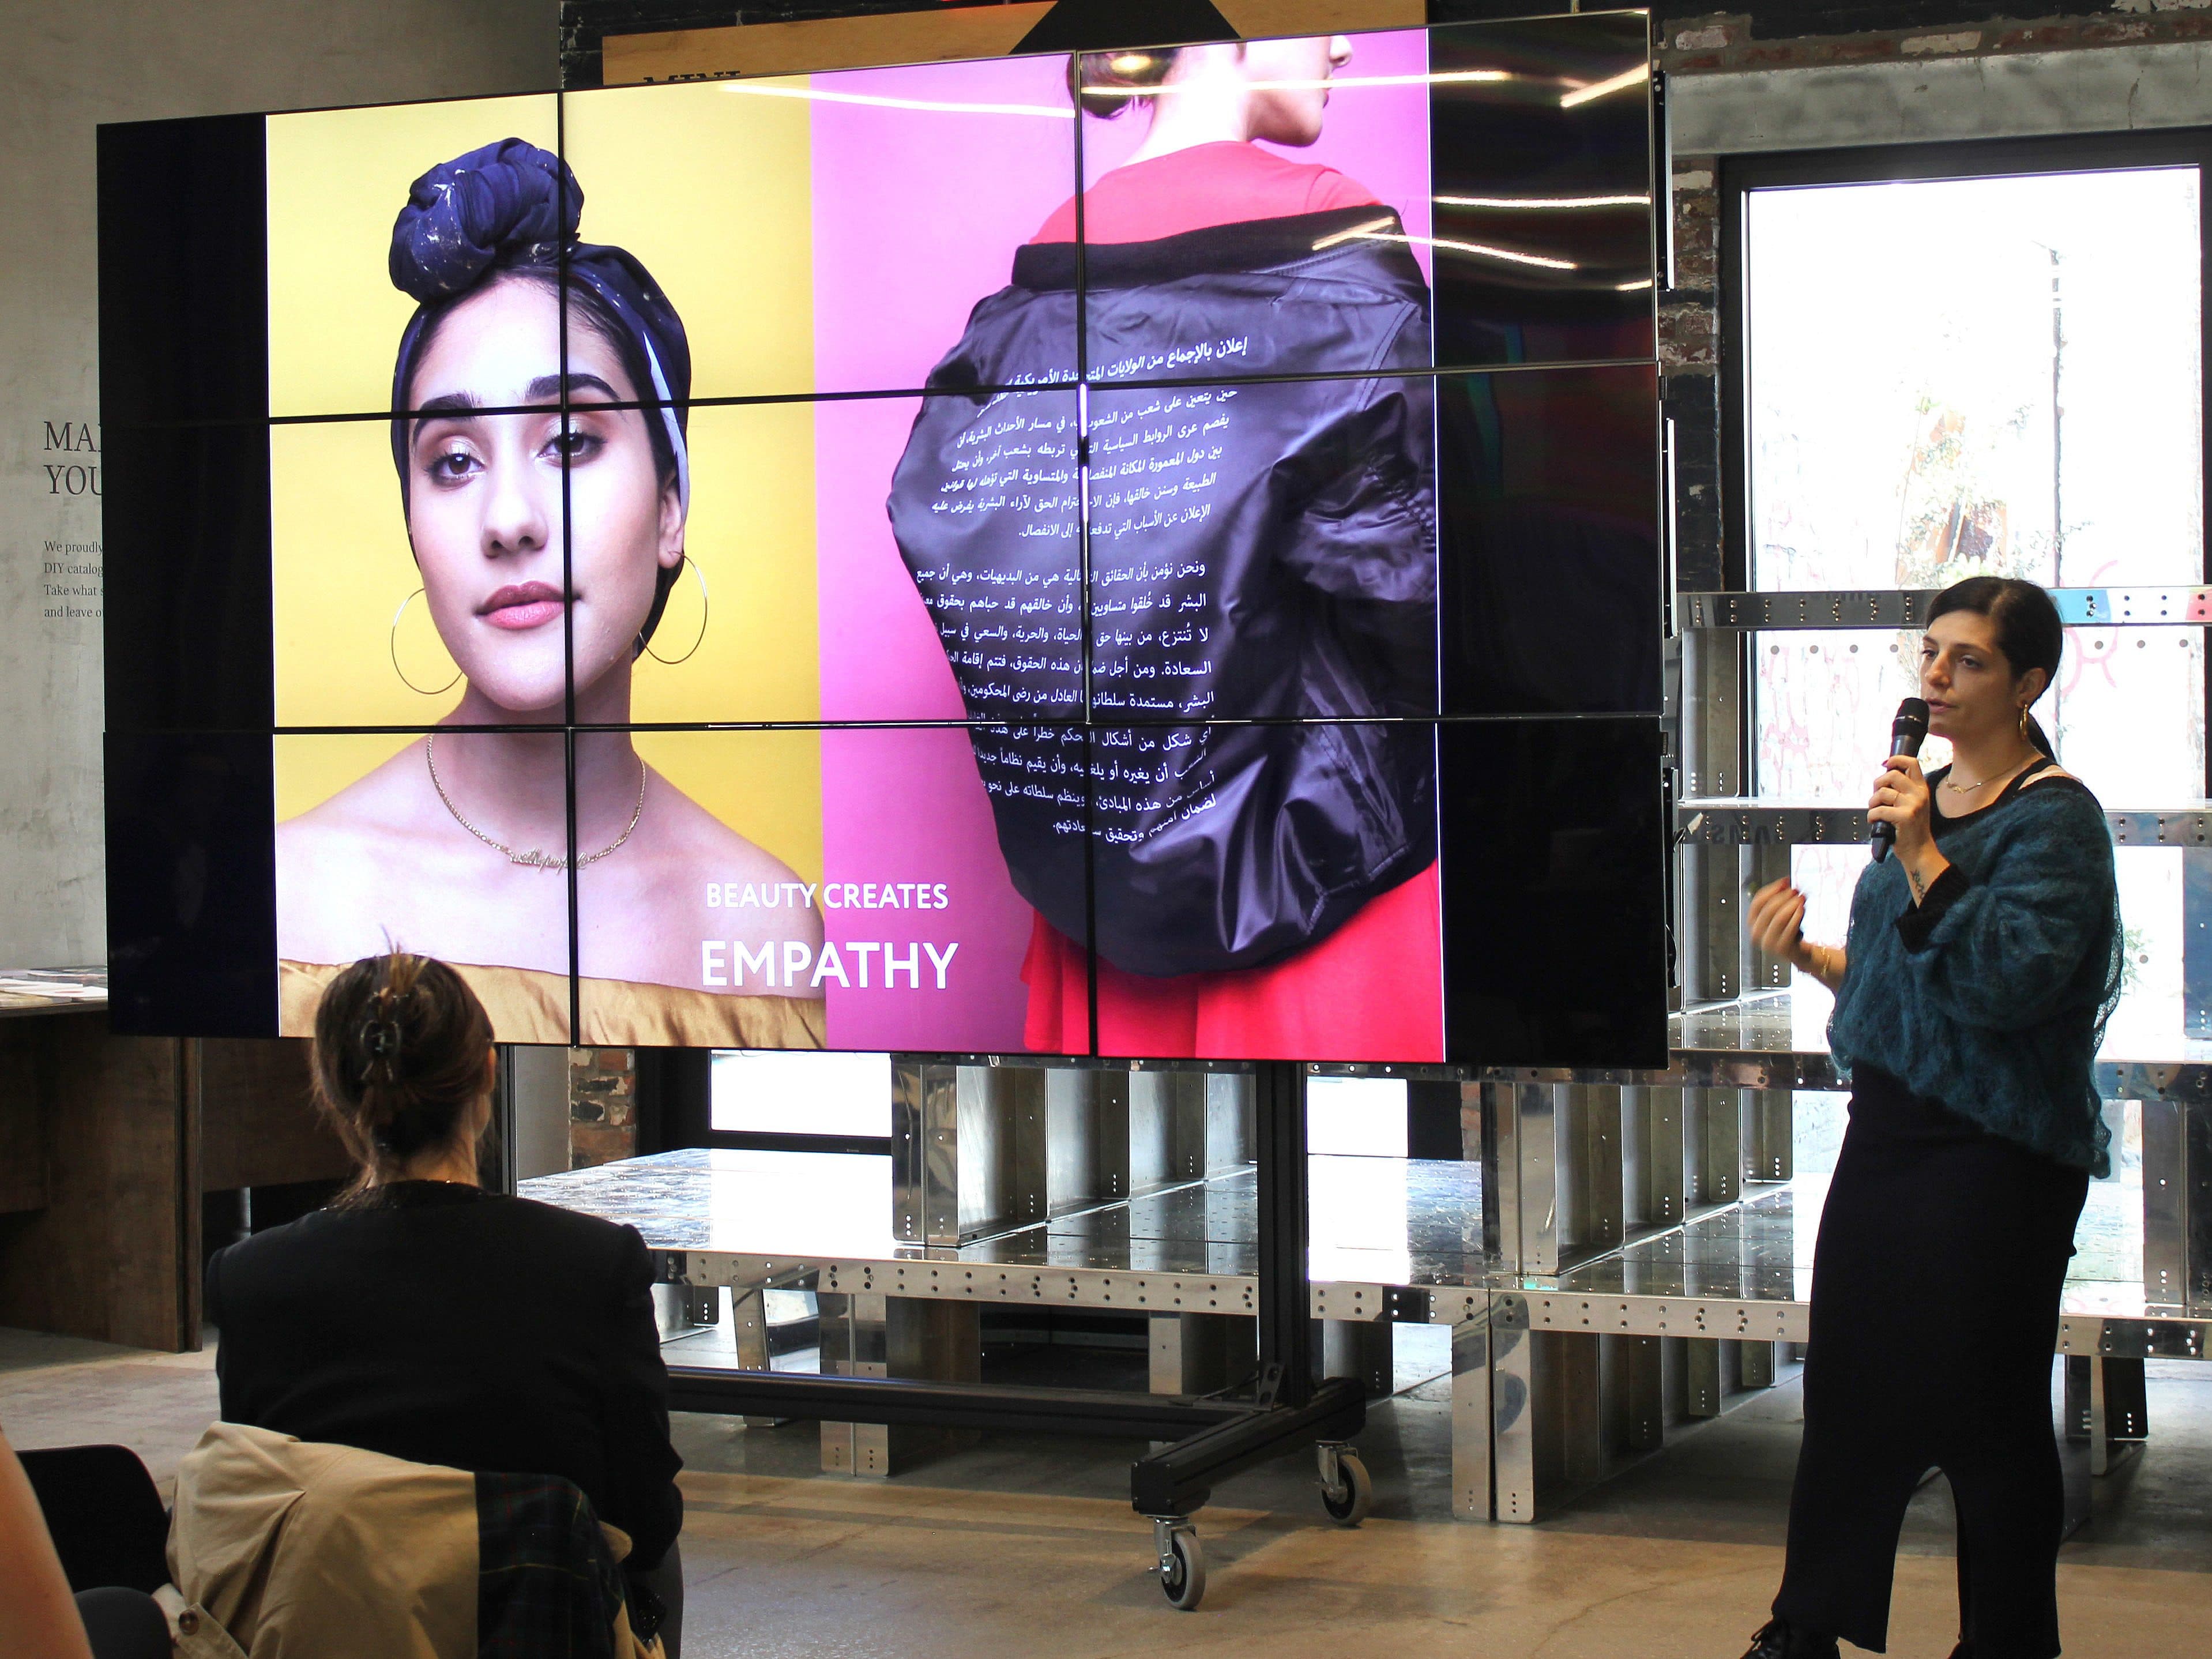 A woman presents on stage with a microphone, standing next to a large screen displaying two fashion photos and the text "BEAUTY CREATES EMPATHY." The audience is seated, and the setting appears to be an art gallery or modern presentation space.